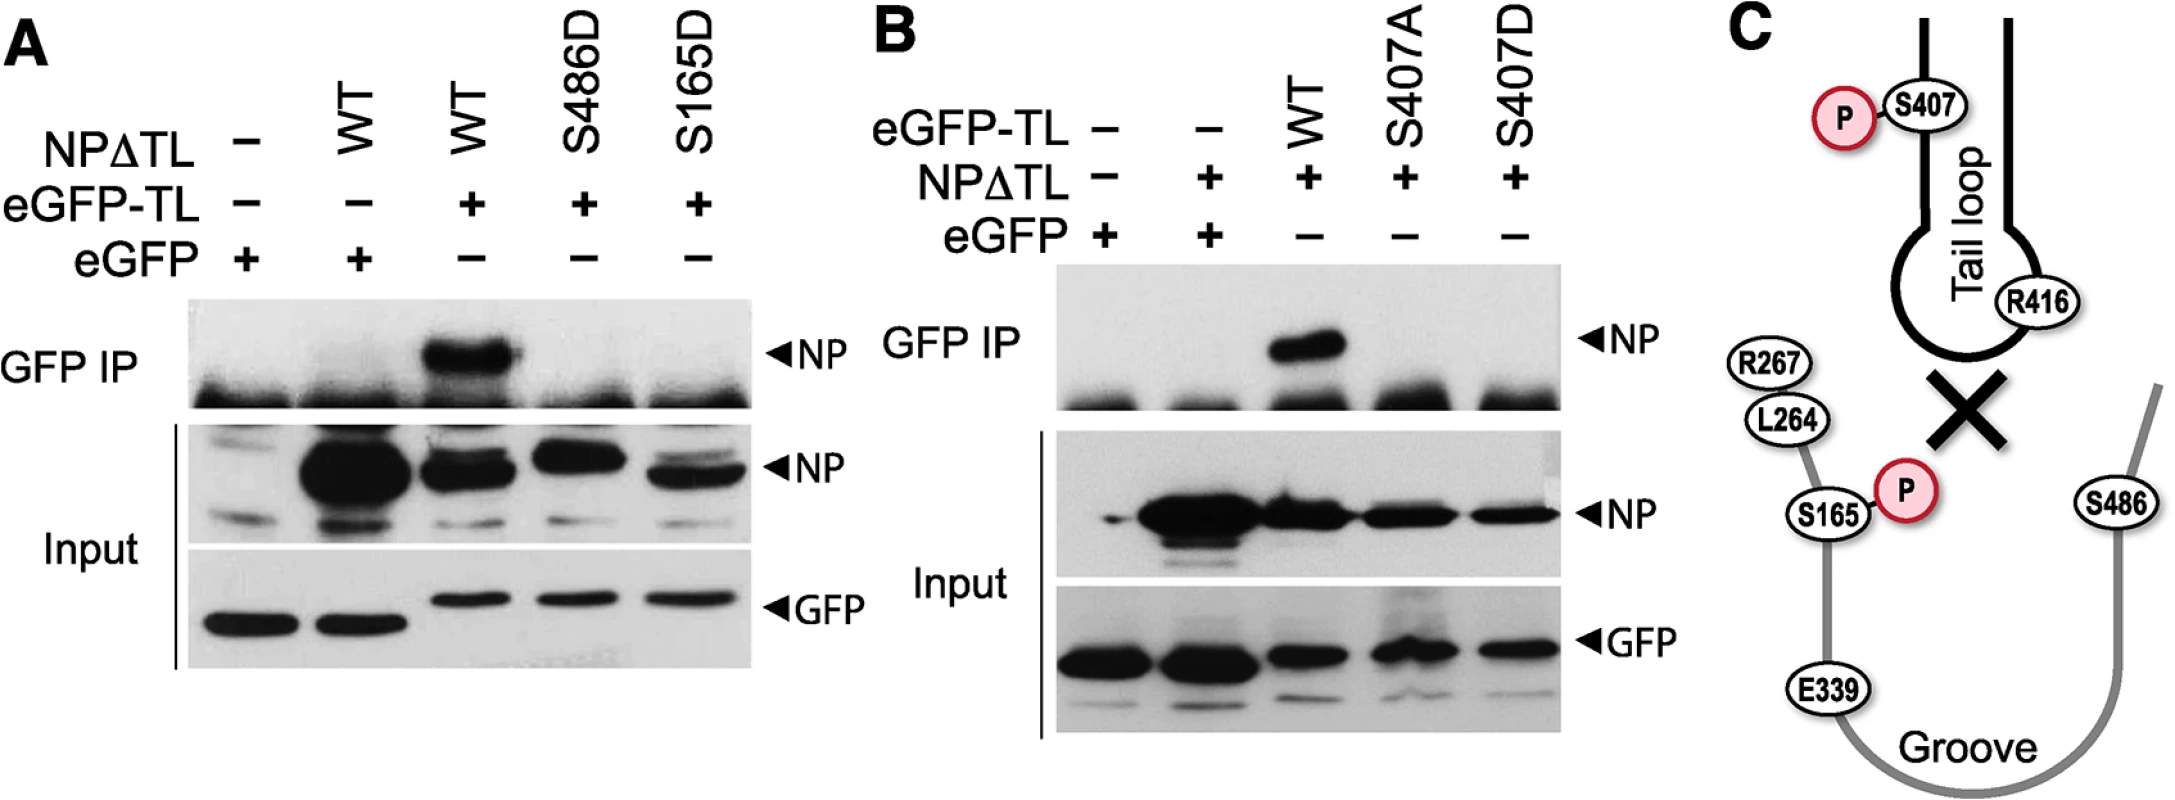 Phosphorylation of the tail loop and binding groove maintains monomeric NP.